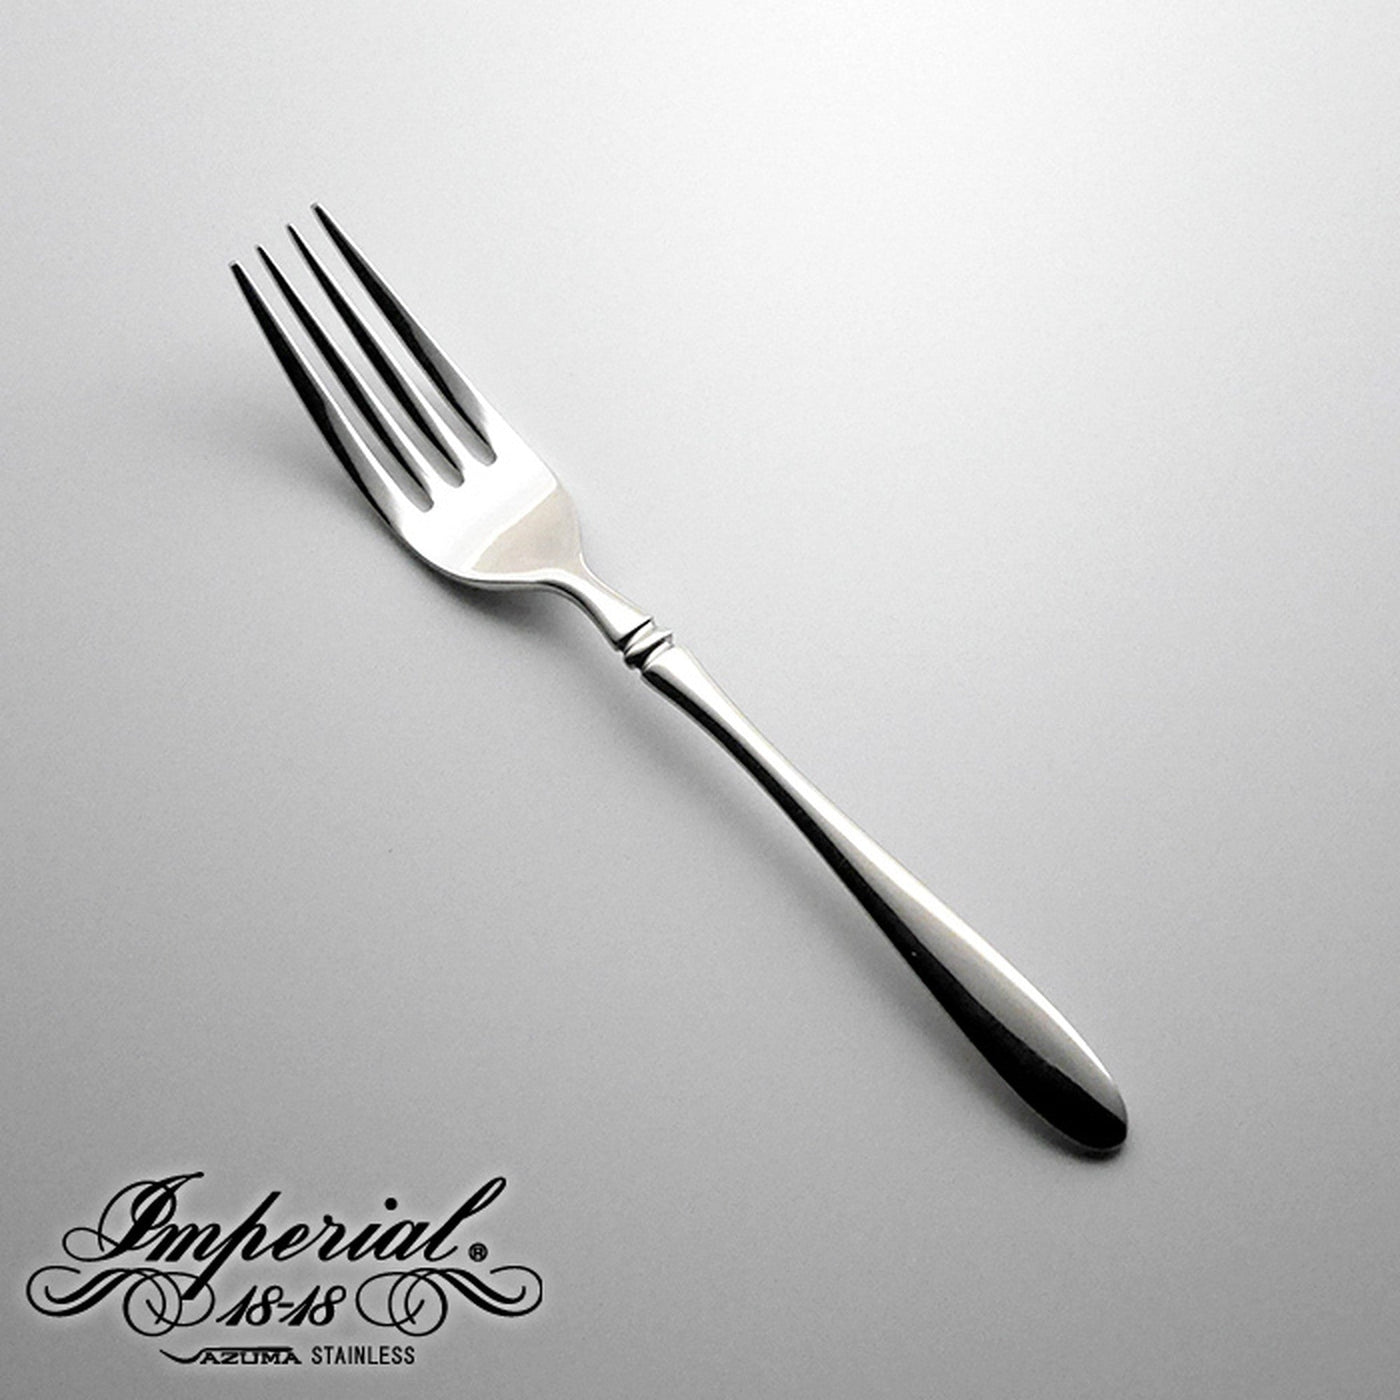 W-18 Imperial Table Fork